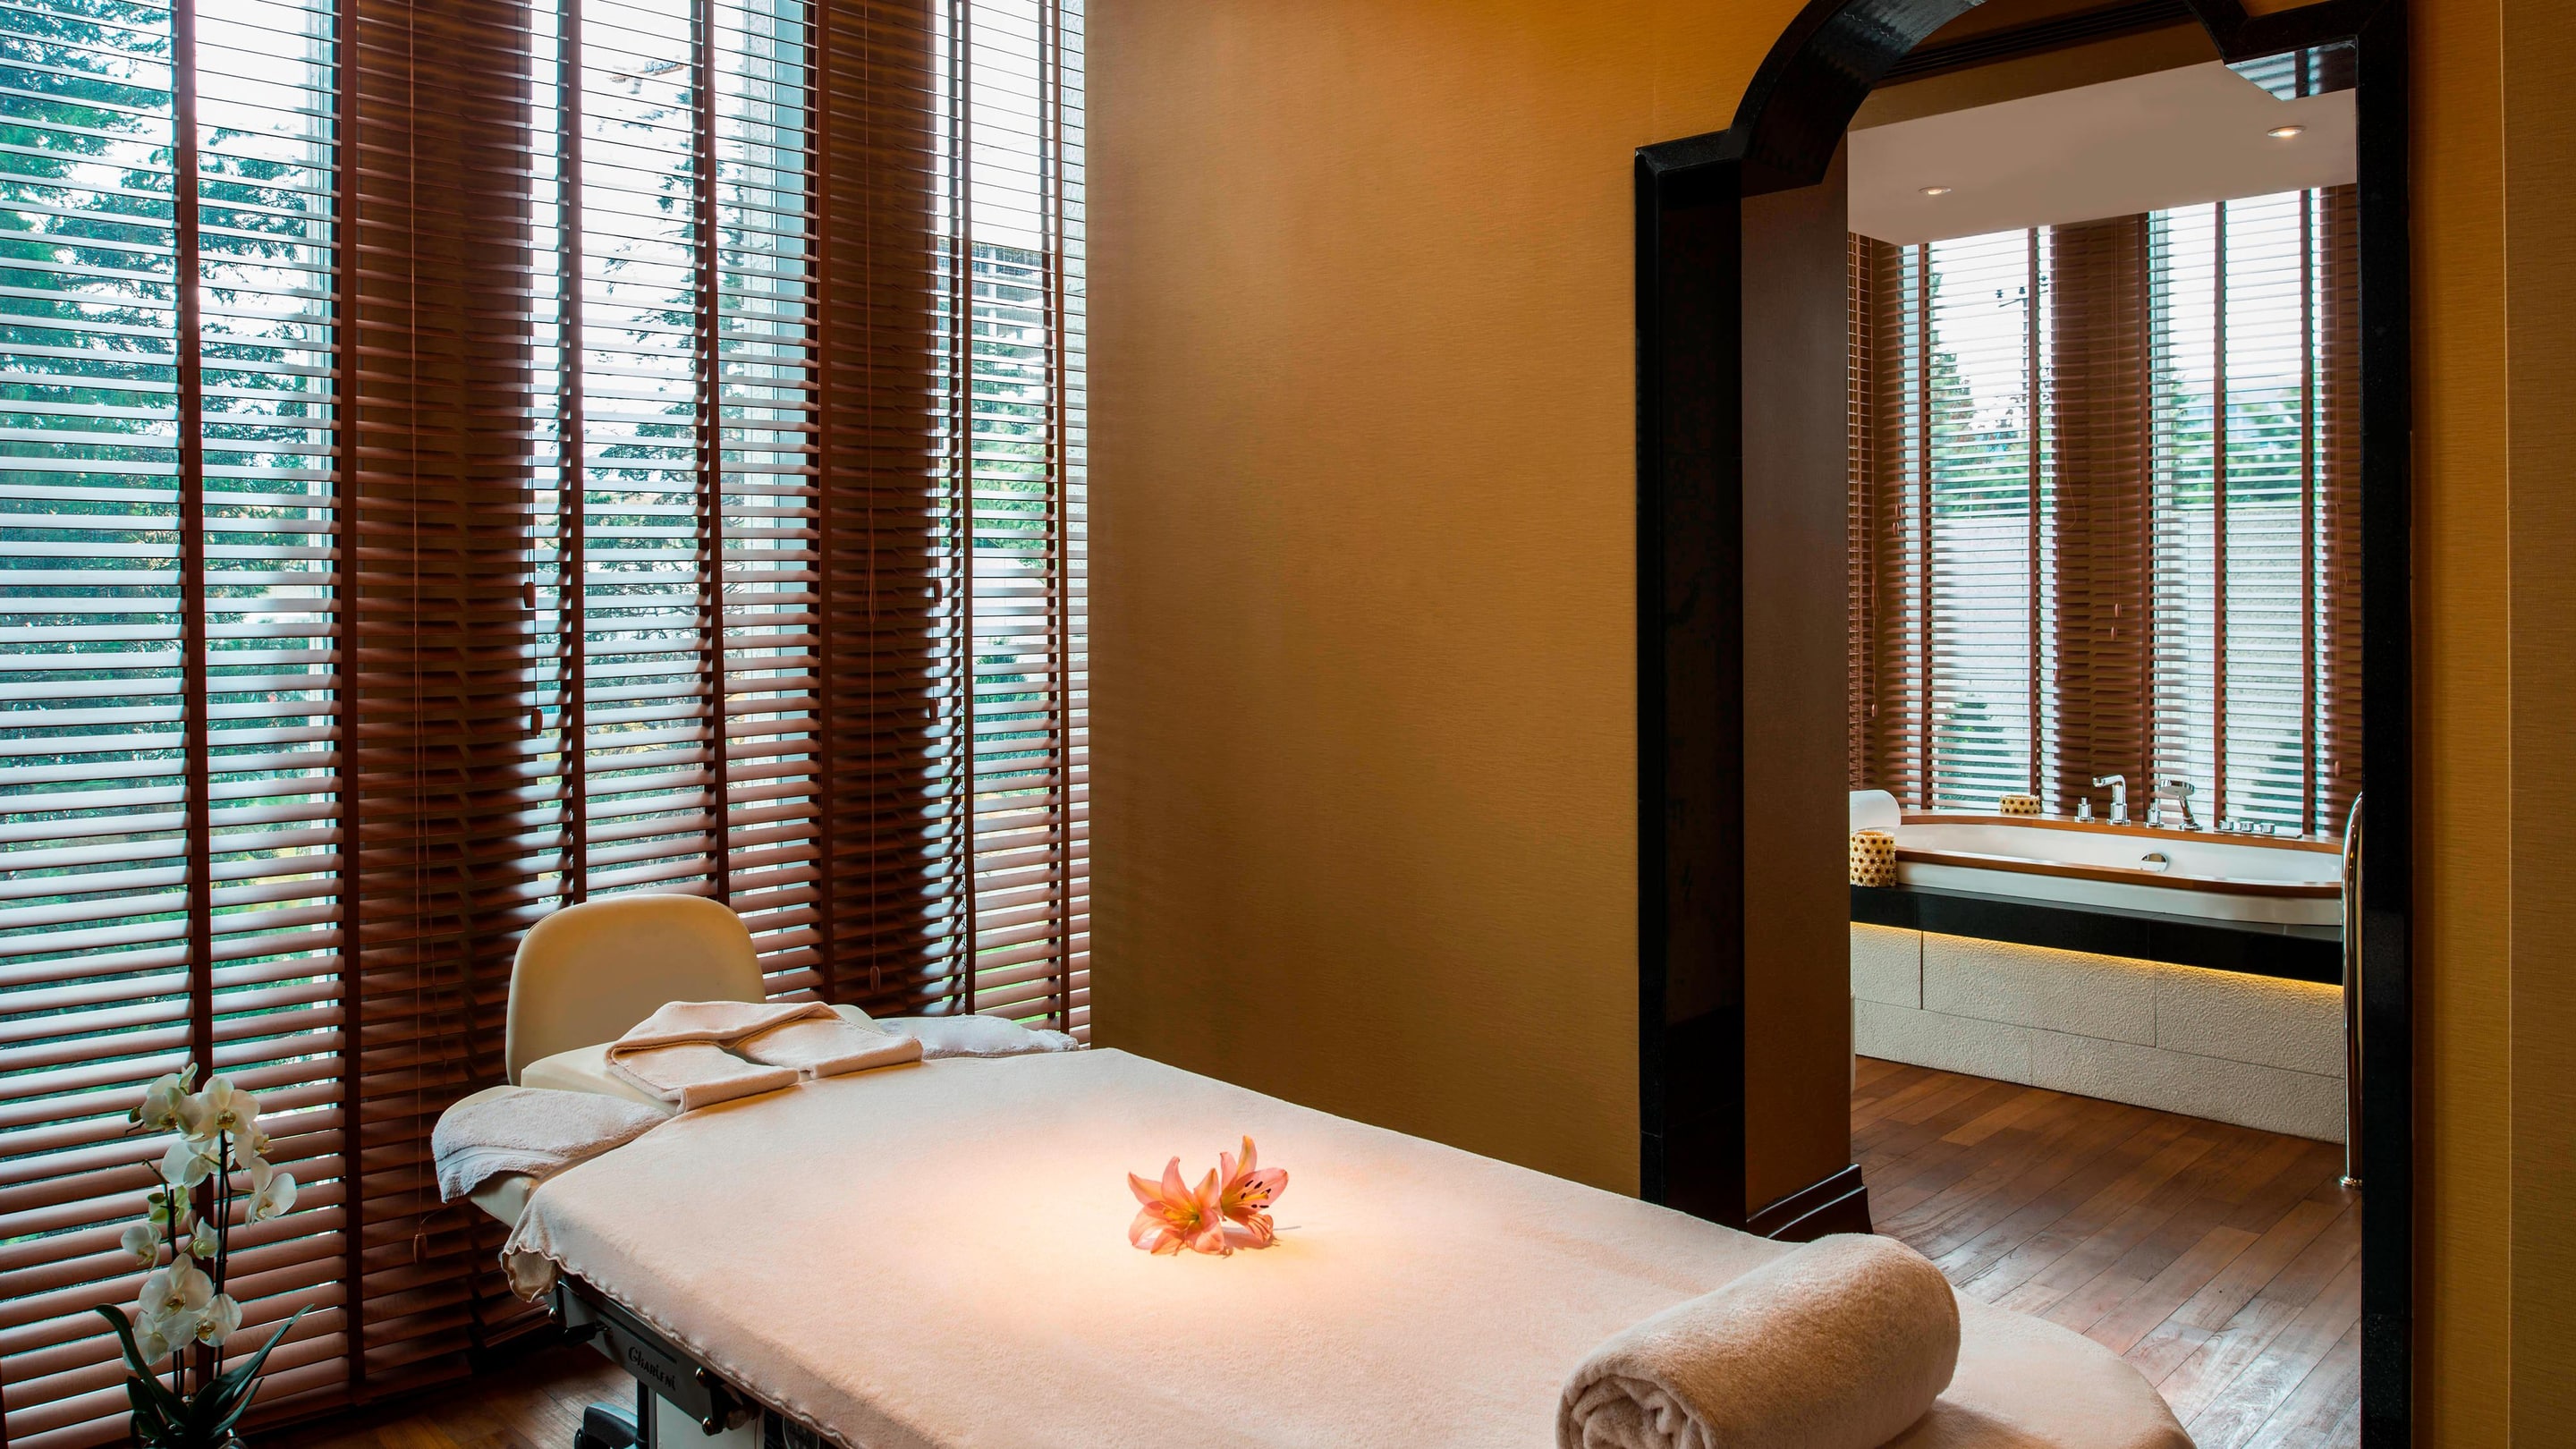 Spa treatment room with a massage table set with towels next to a window.